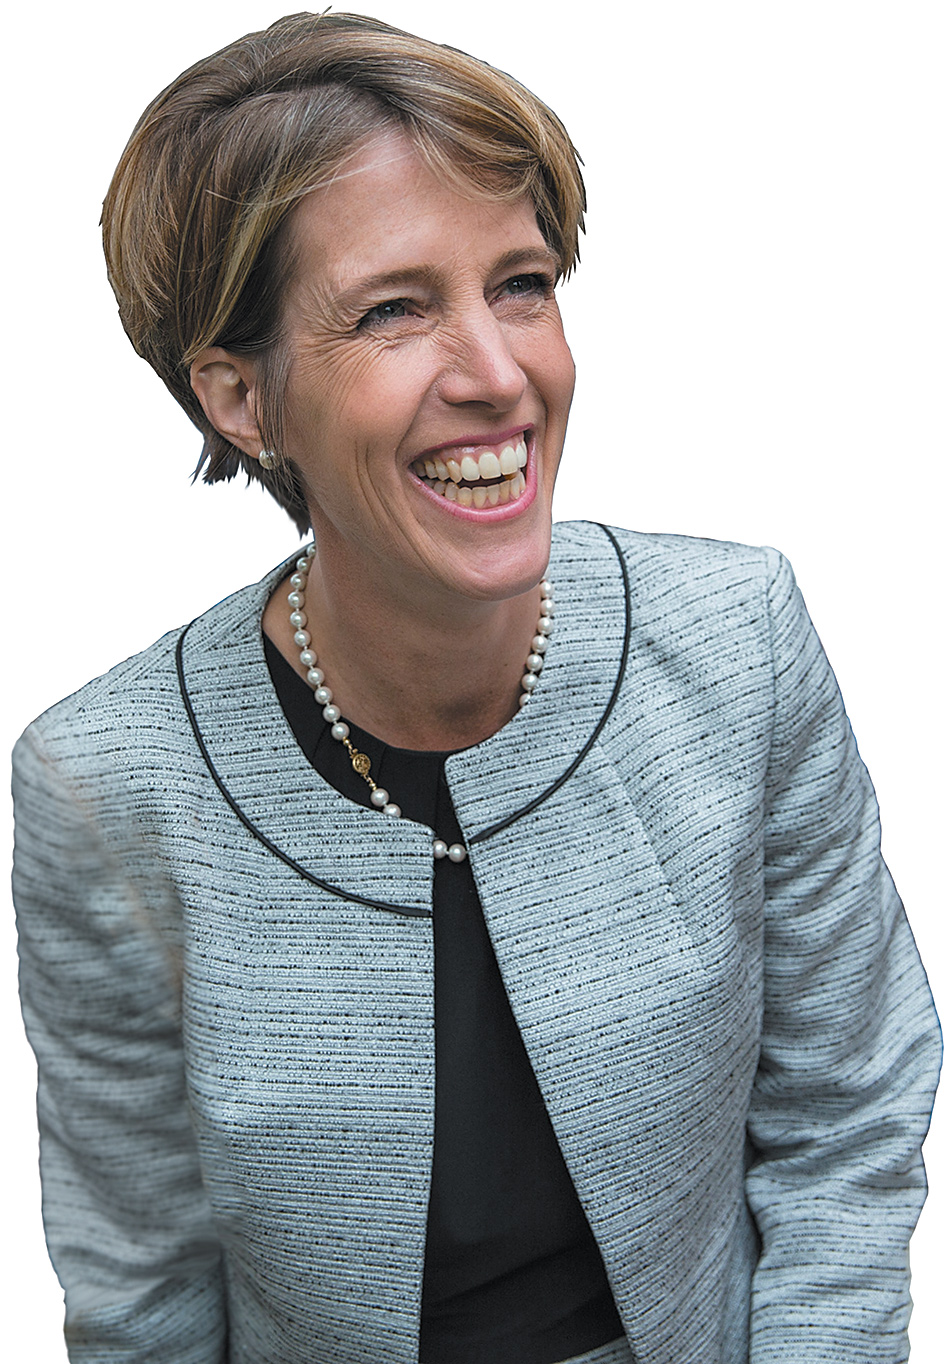 Zephyr Teachout during her campaign for governor against Andrew Cuomo, New York City, September 2014